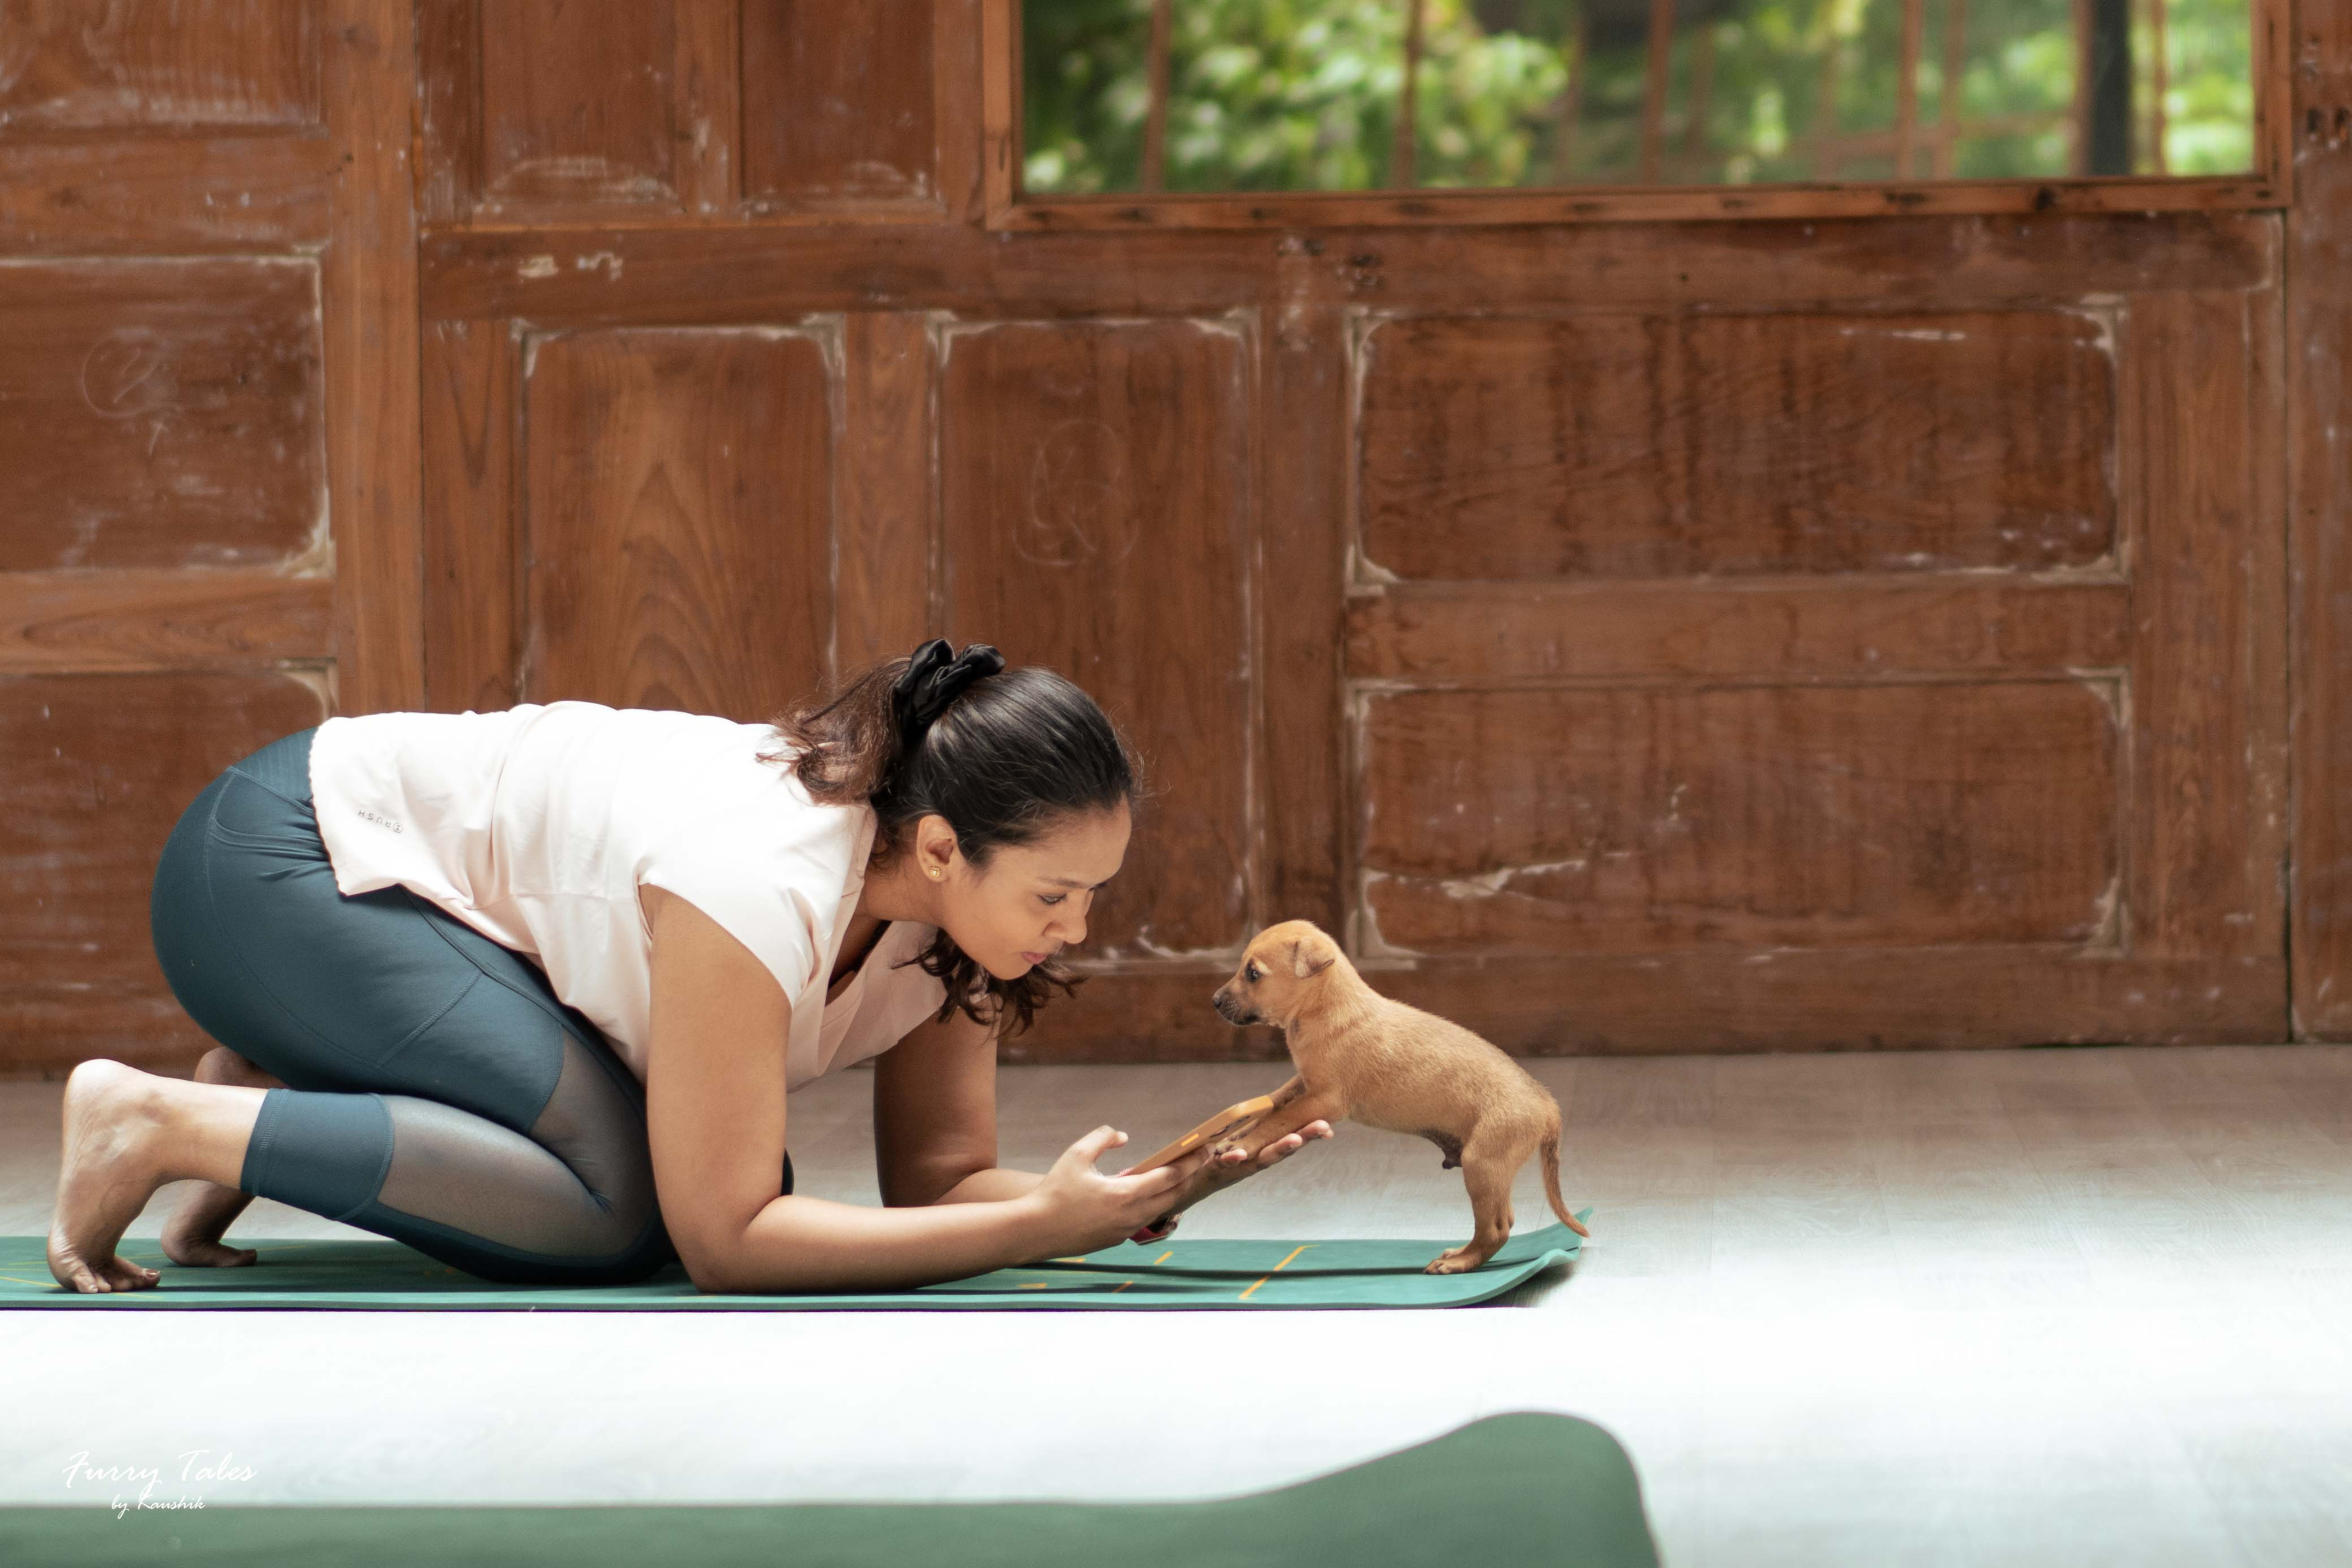 An India-based initiative teaches beginners’ yoga to people as dogs and cats from shelters roam about the class. Its founders call it “pawga”, and say it is a “one-of-a-kind wellness experience”. Photo: Pawga – Pet Yoga India